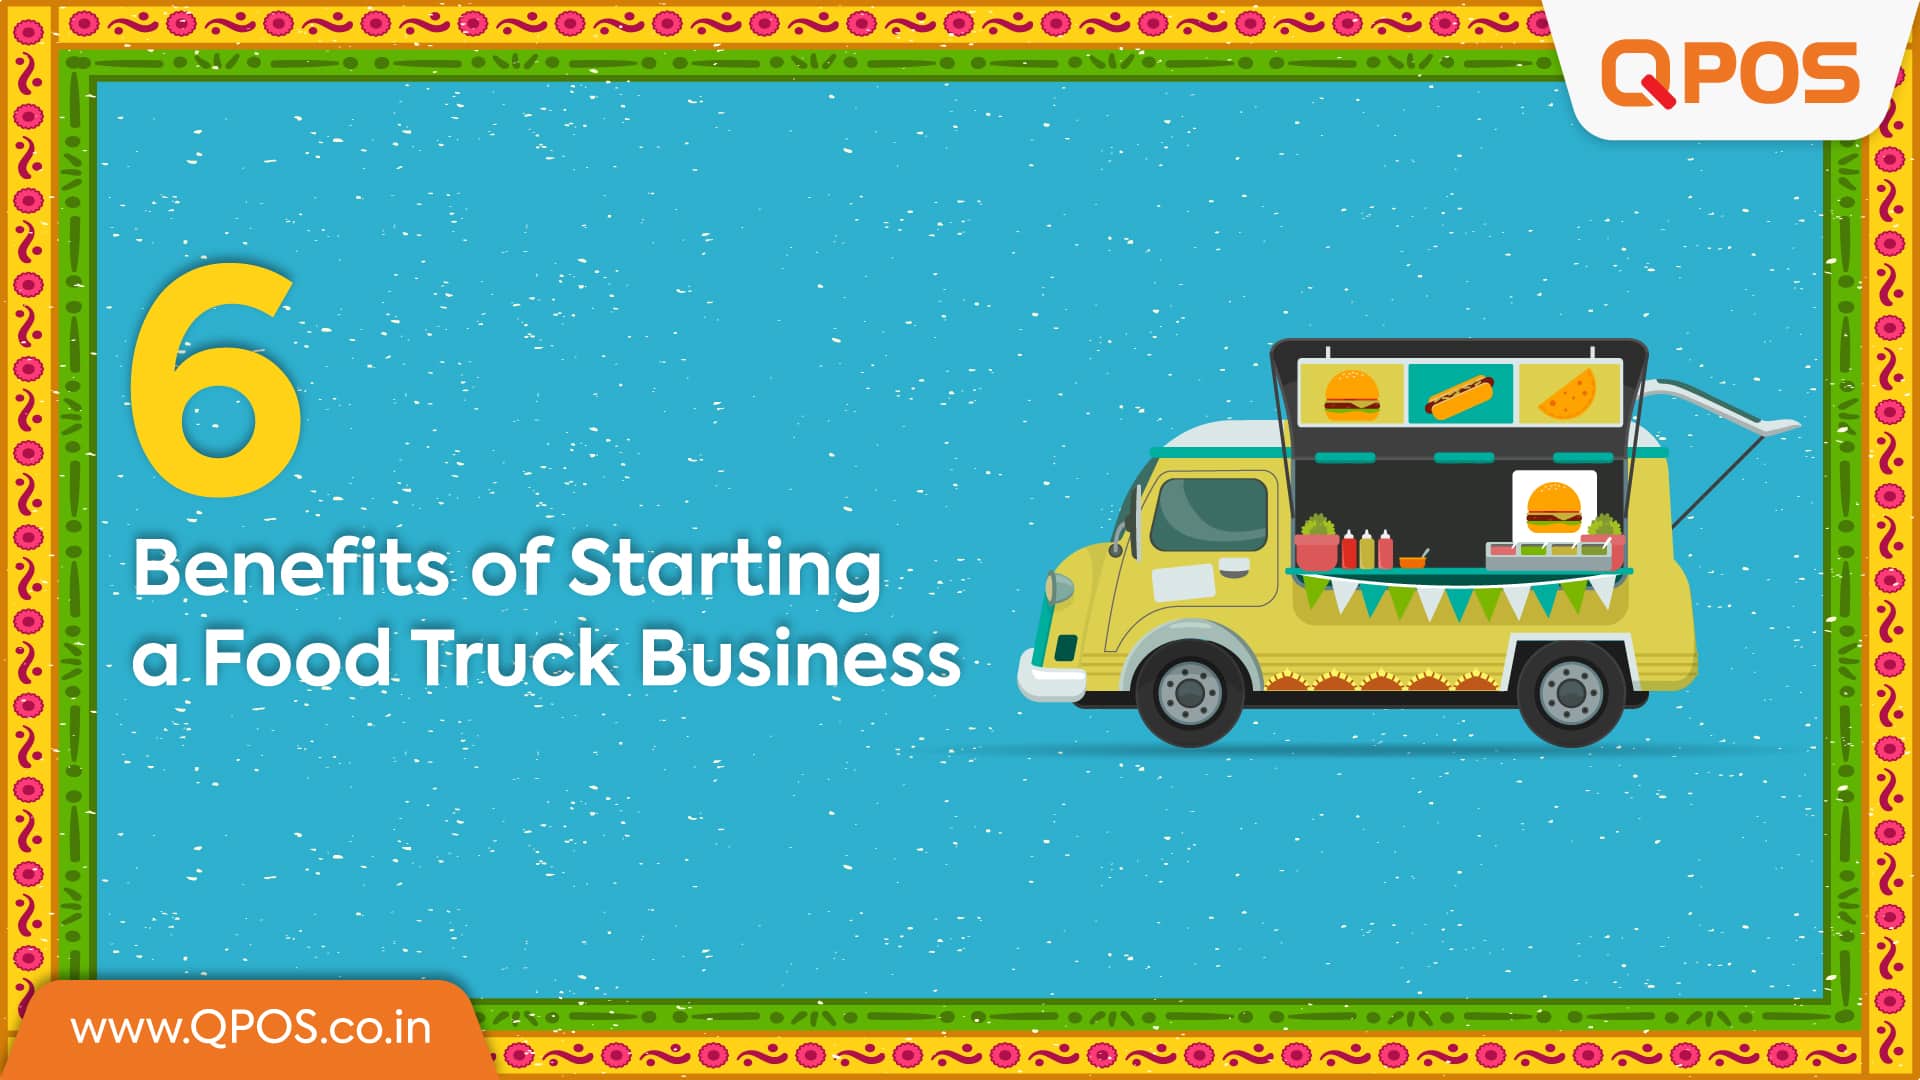 QPOS- 6 Benefits of Starting a Food Truck Business